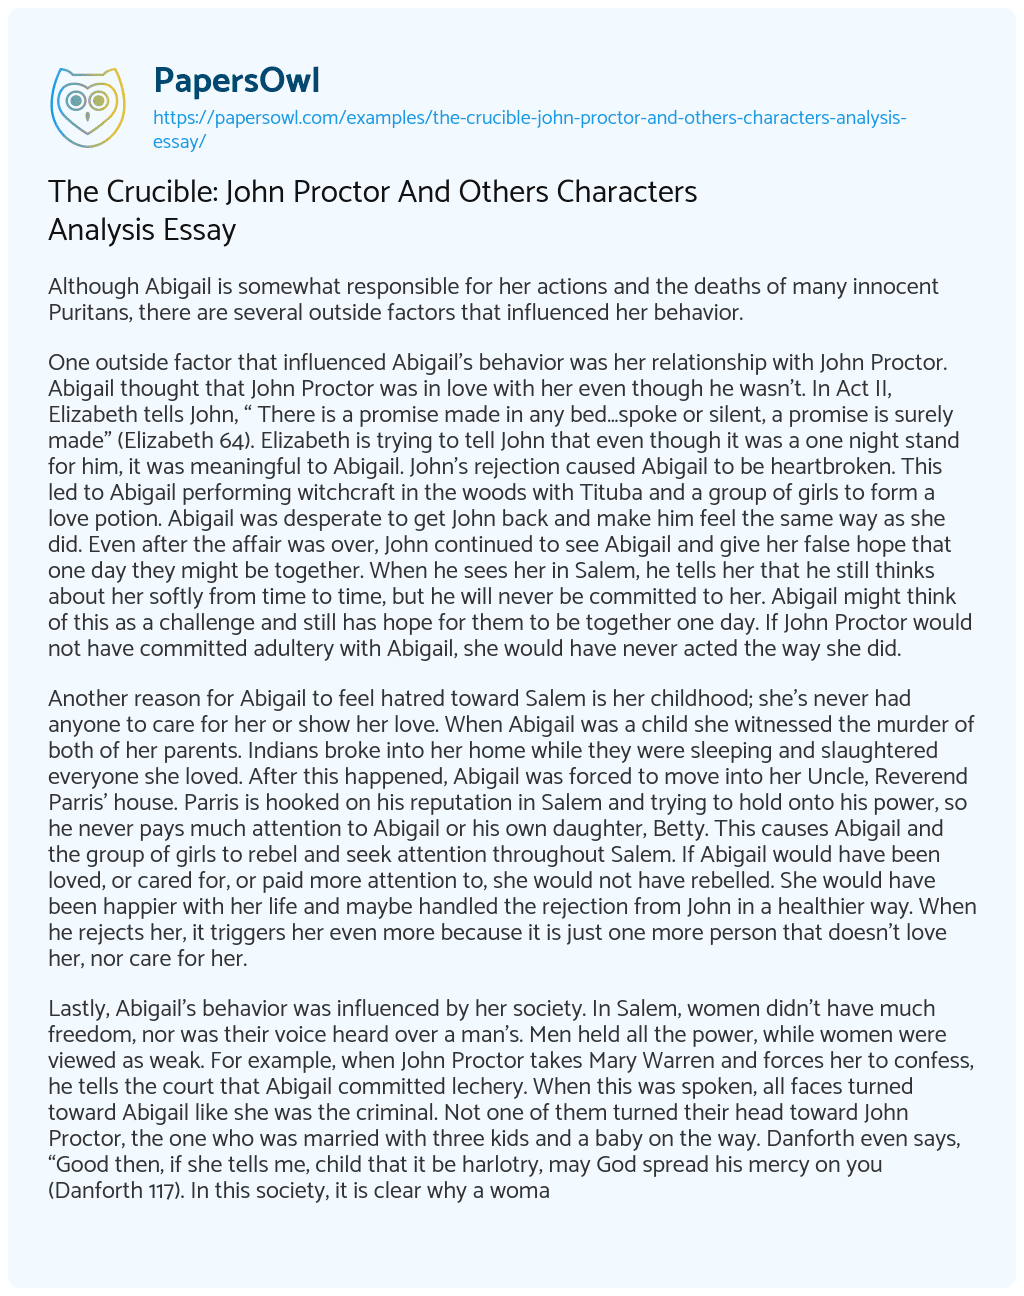 Essay on The Crucible: John Proctor and Others Characters Analysis Essay